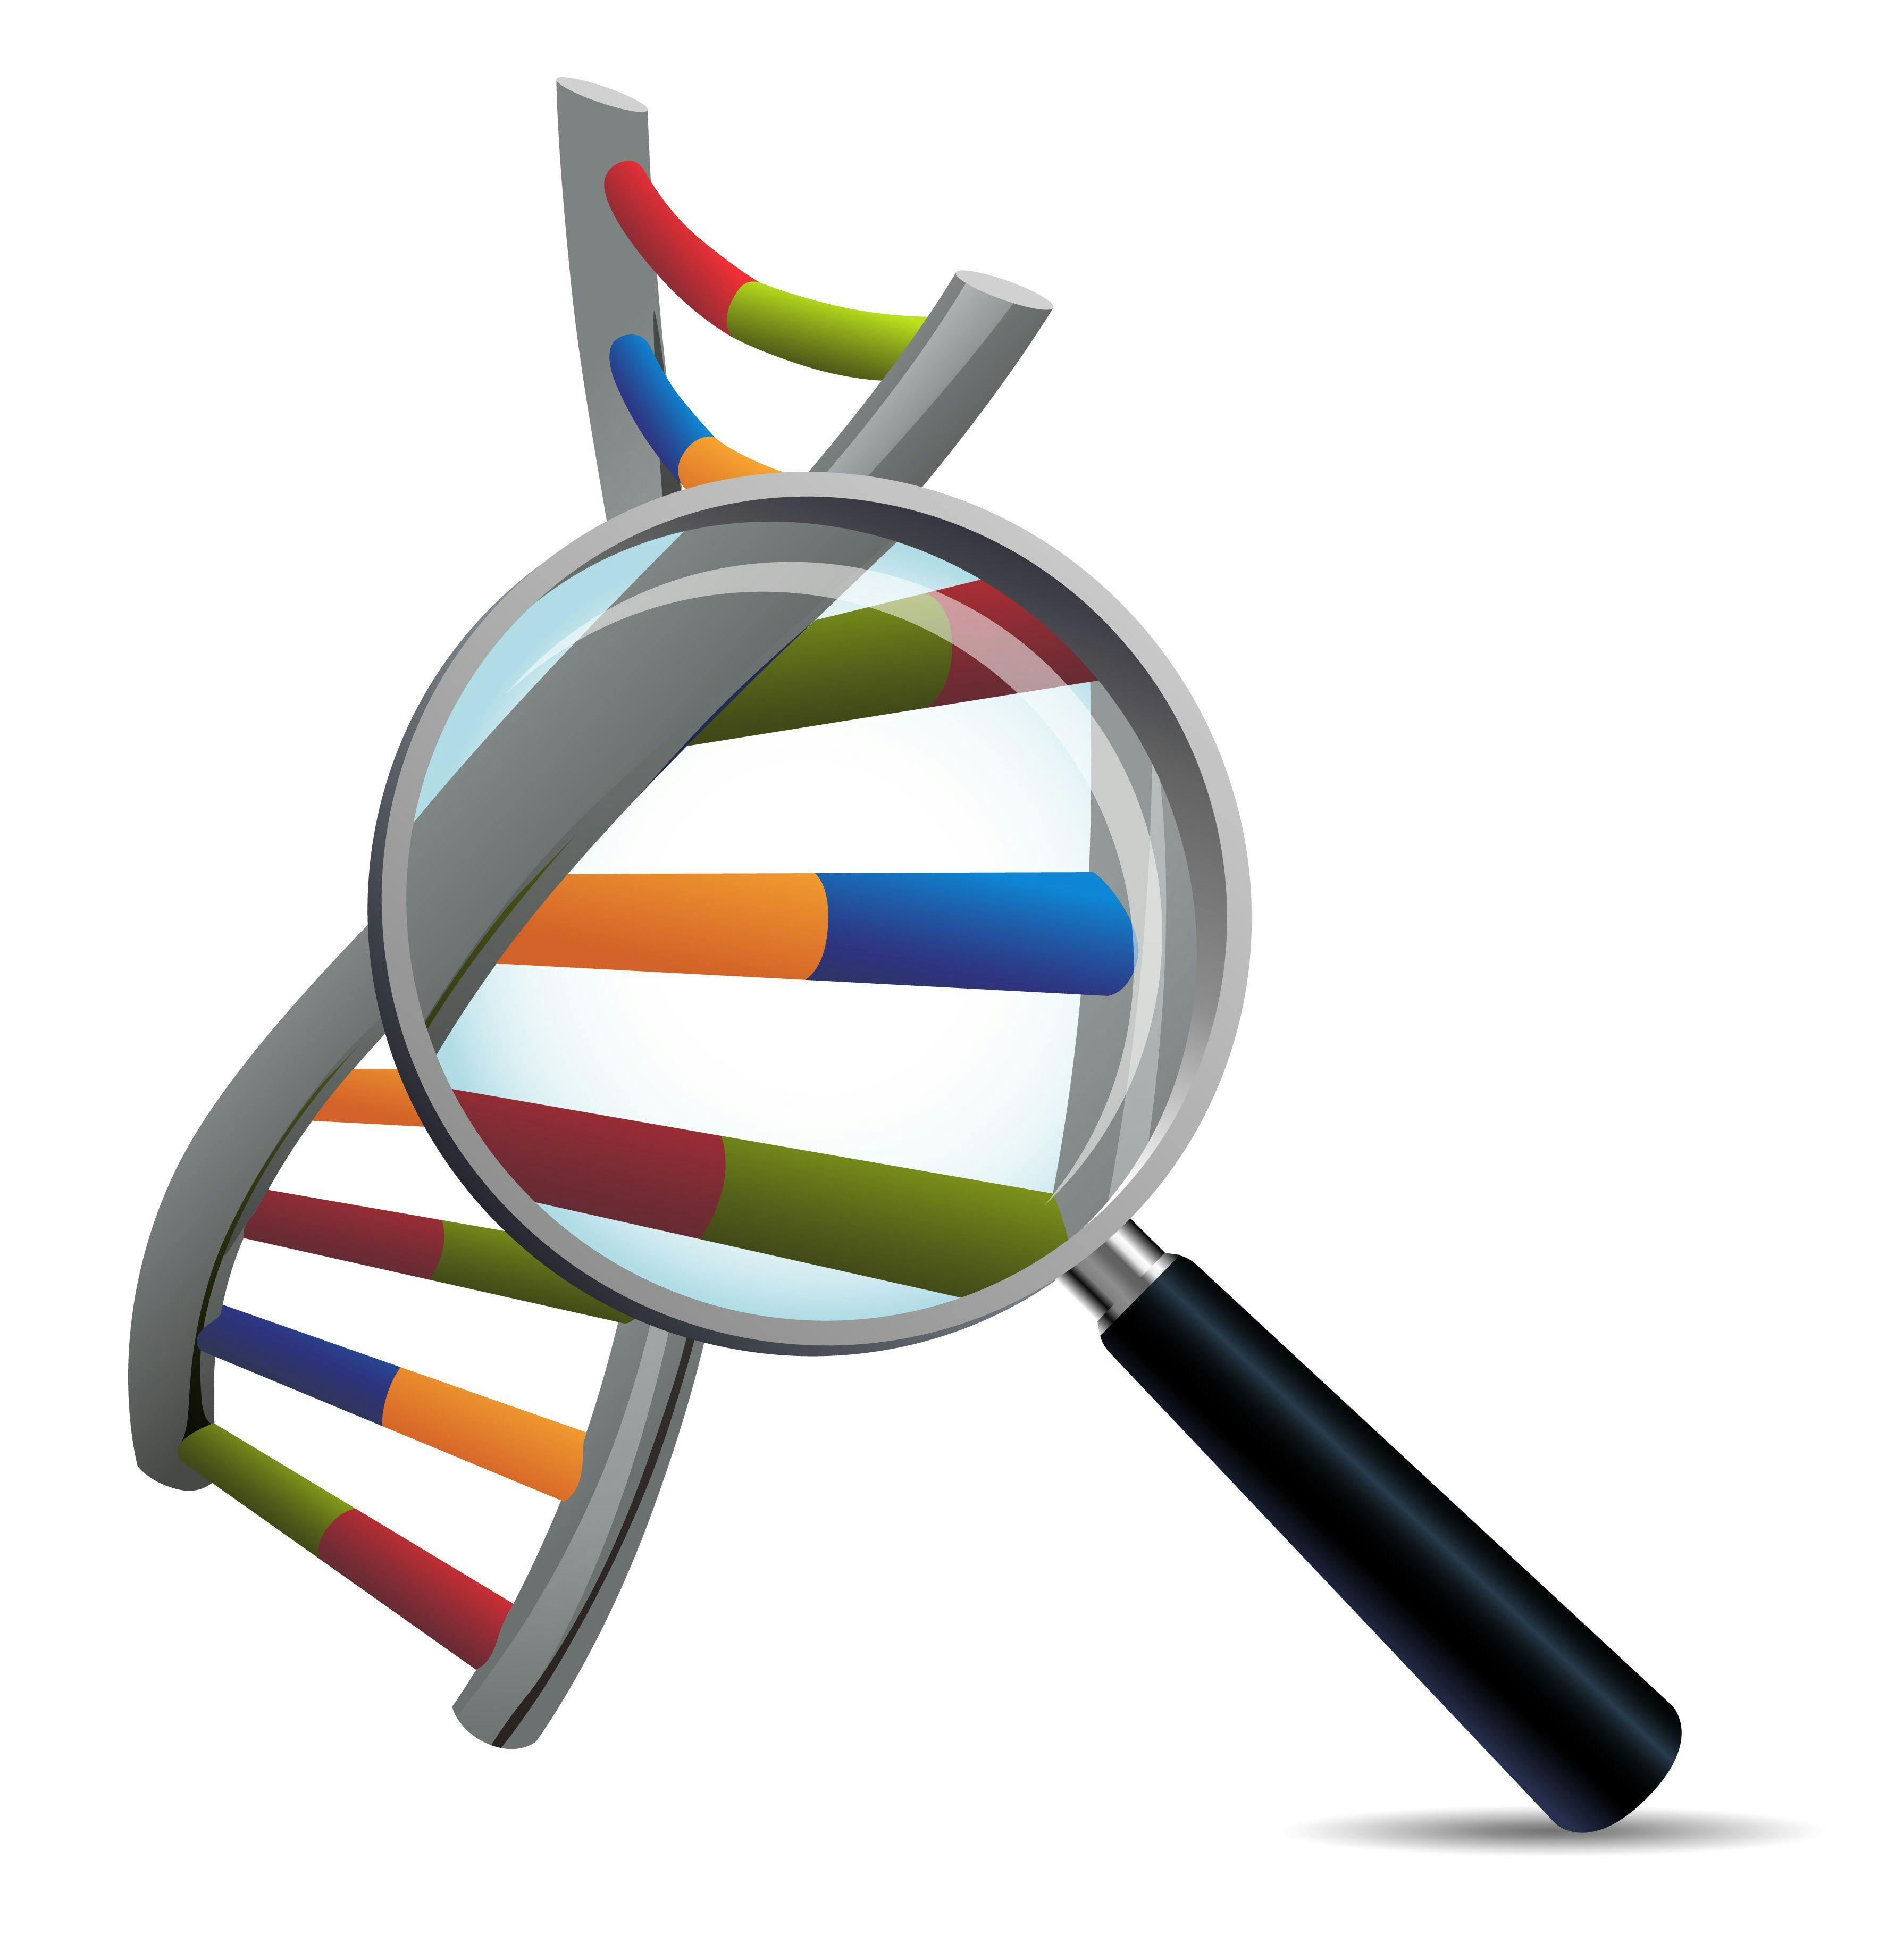 Researchers examine barriers to family genetic testing for Fabry disease